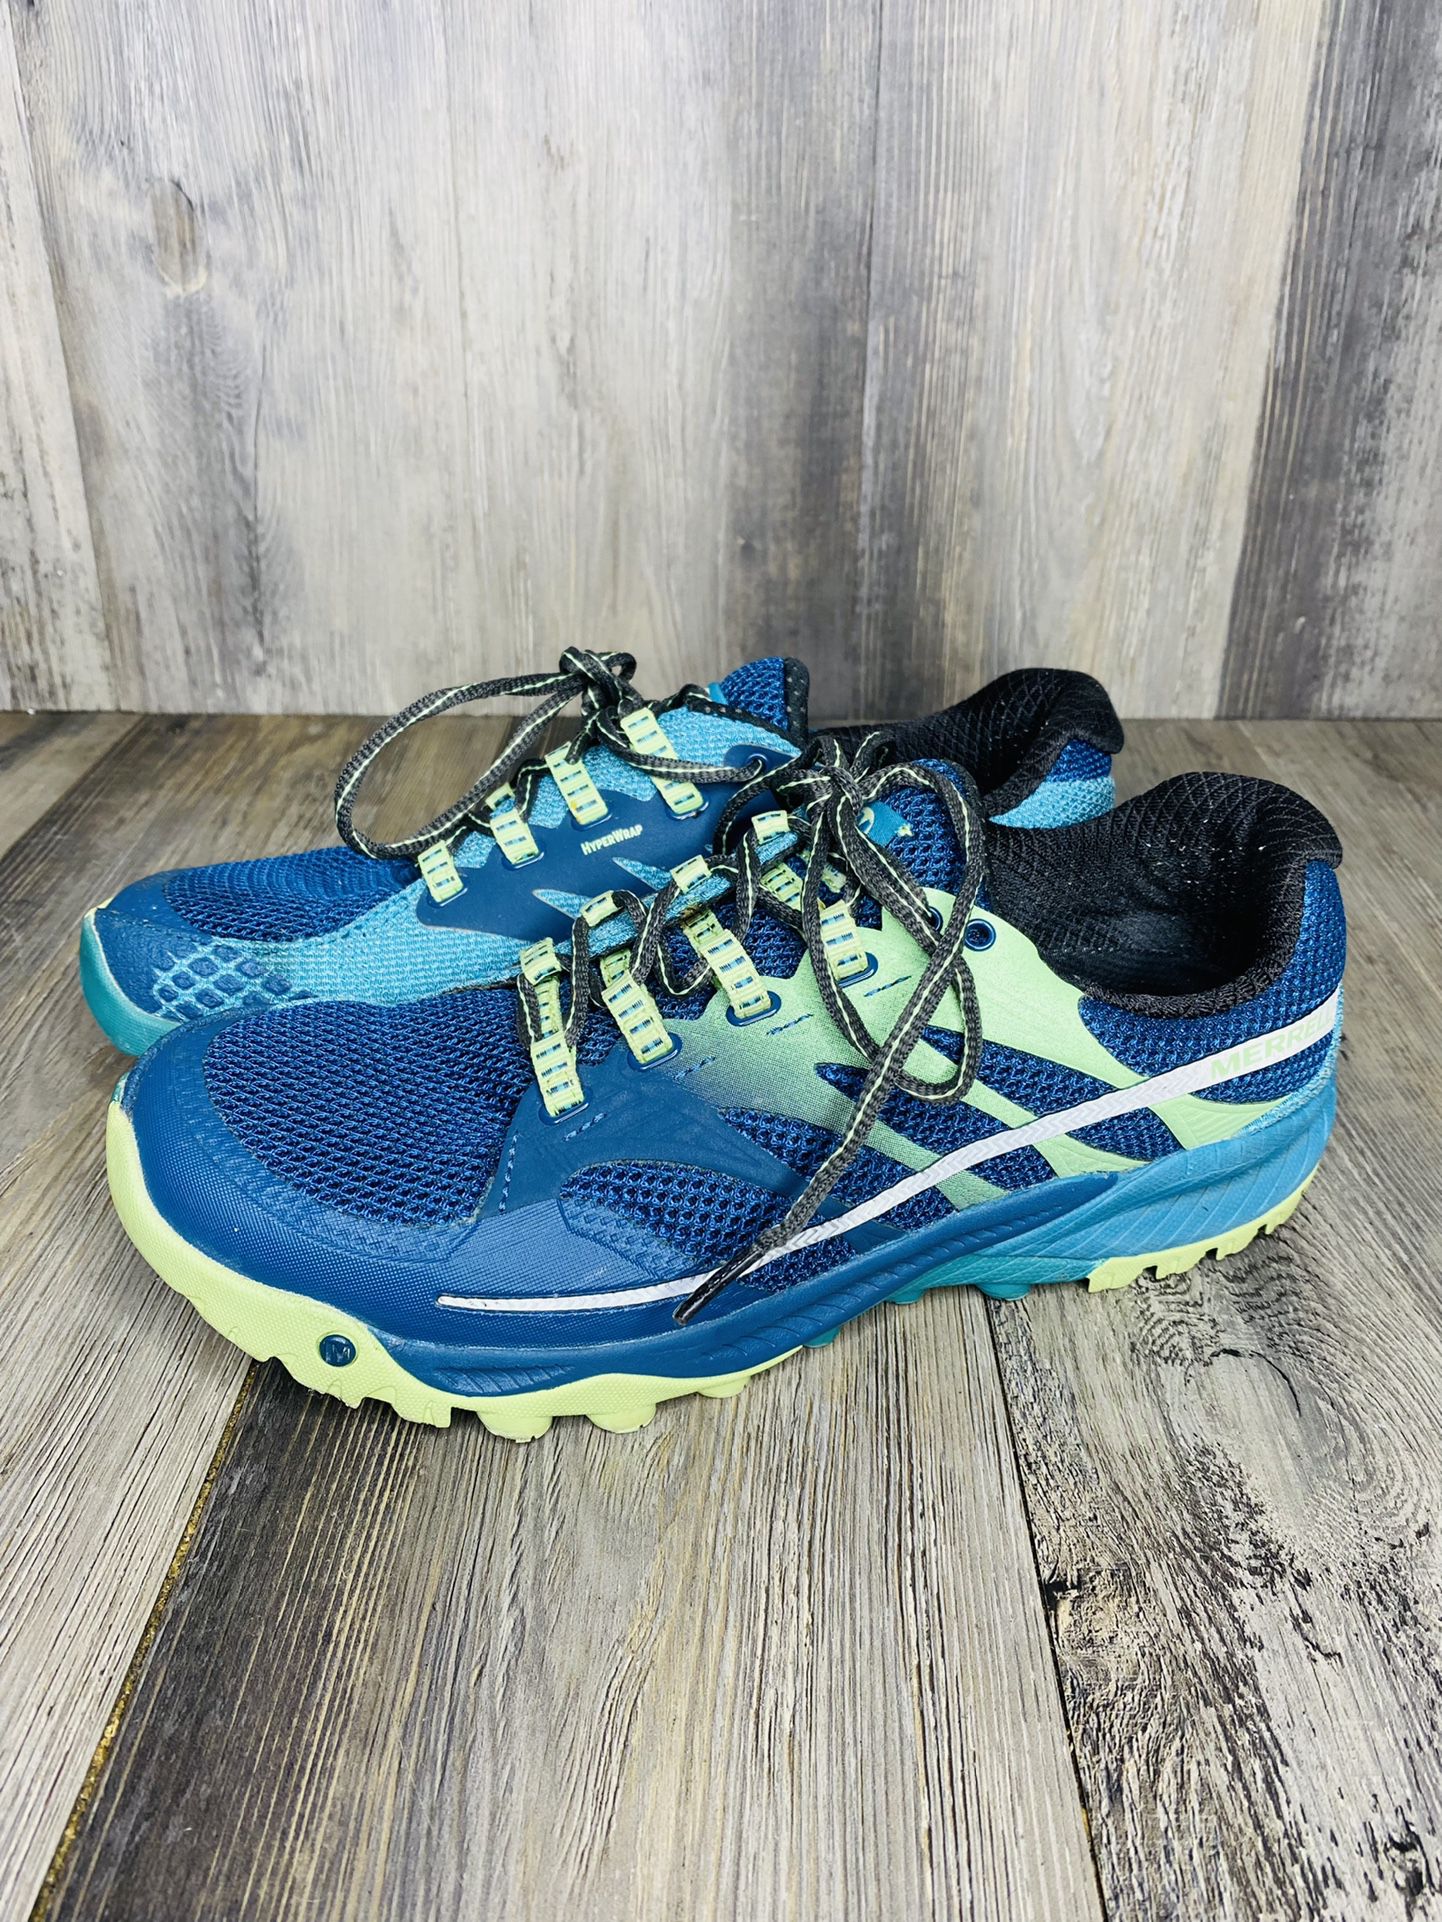 Citron Anvendt Duplikering Merrell Womens All Out Charge Trail Running Shoes Low Top Lace Up 9 M  J35536 for Sale in Charlotte, NC - OfferUp